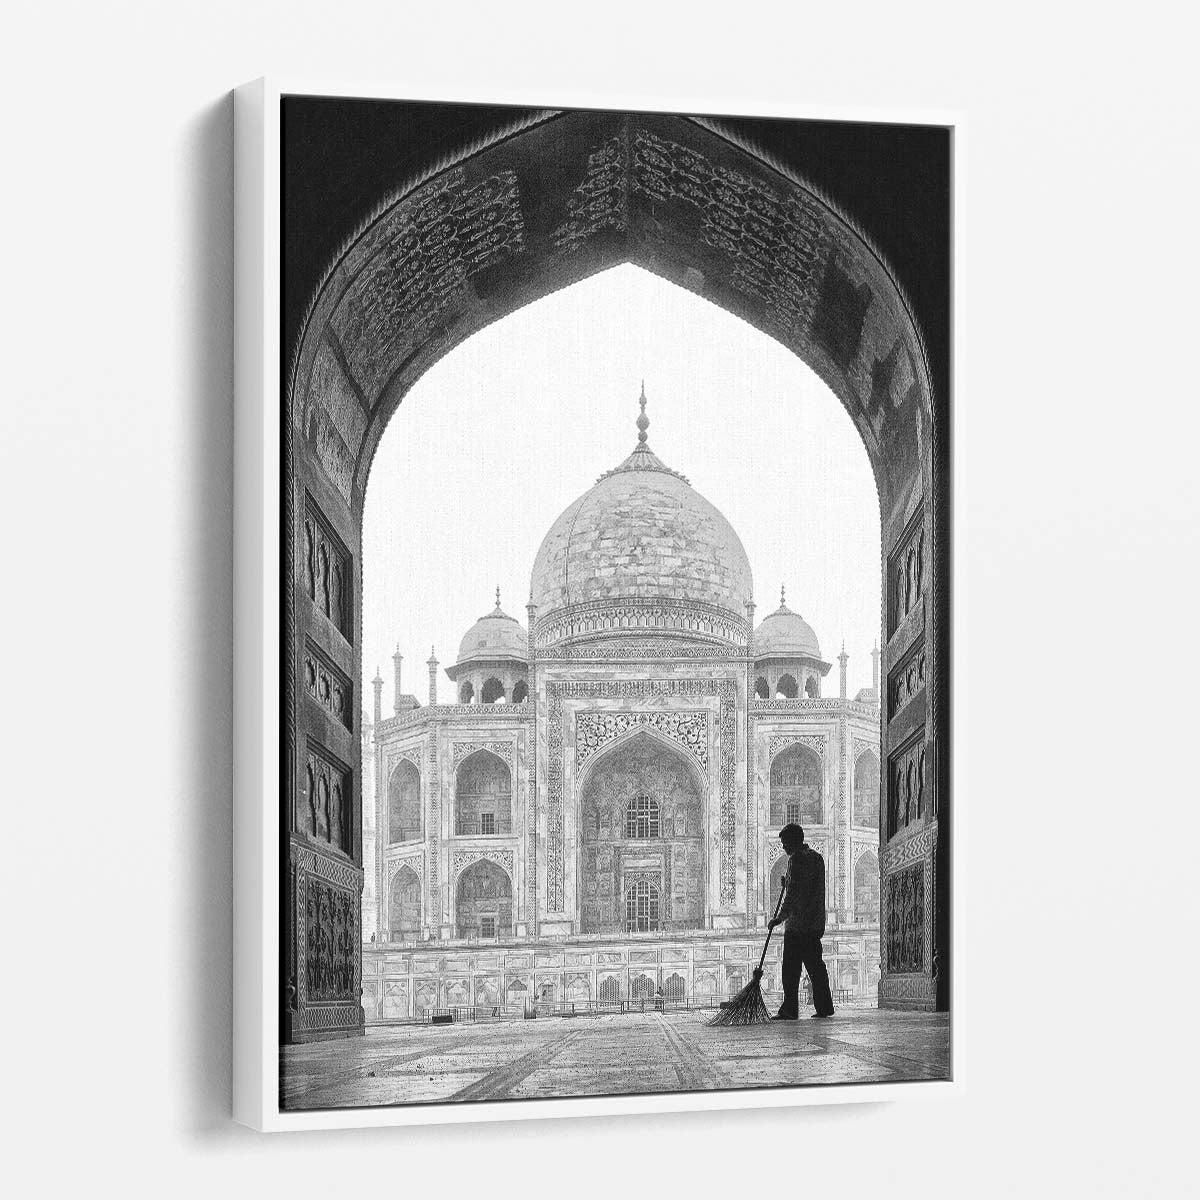 Early Morning Taj Mahal Cleaning - Monochrome Photography Art by Luxuriance Designs, made in USA